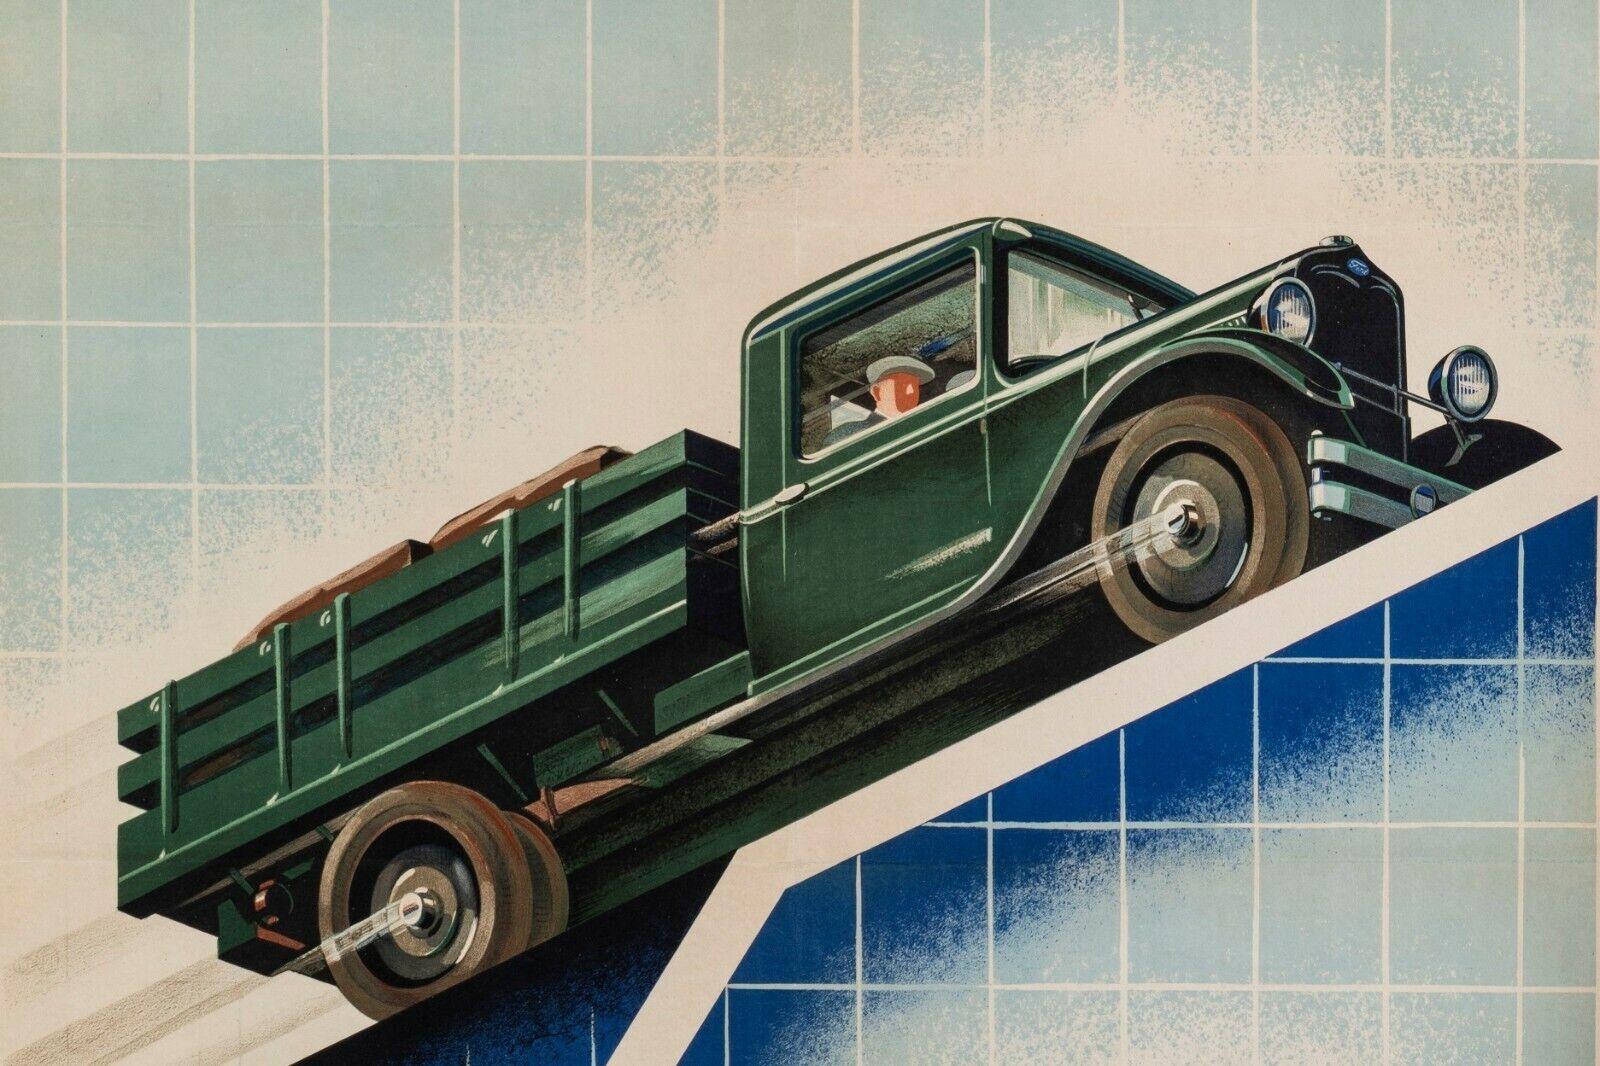 Original Vintage Poster-R. Auger-Trusion Ford Model Aa-Cars-Fordism, c.1927

Poster for new Ford Model AA trucks, produced between 1927 and 1932, to replace the outdated TT model.

Additional Details: 
Materials and Techniques: Colour